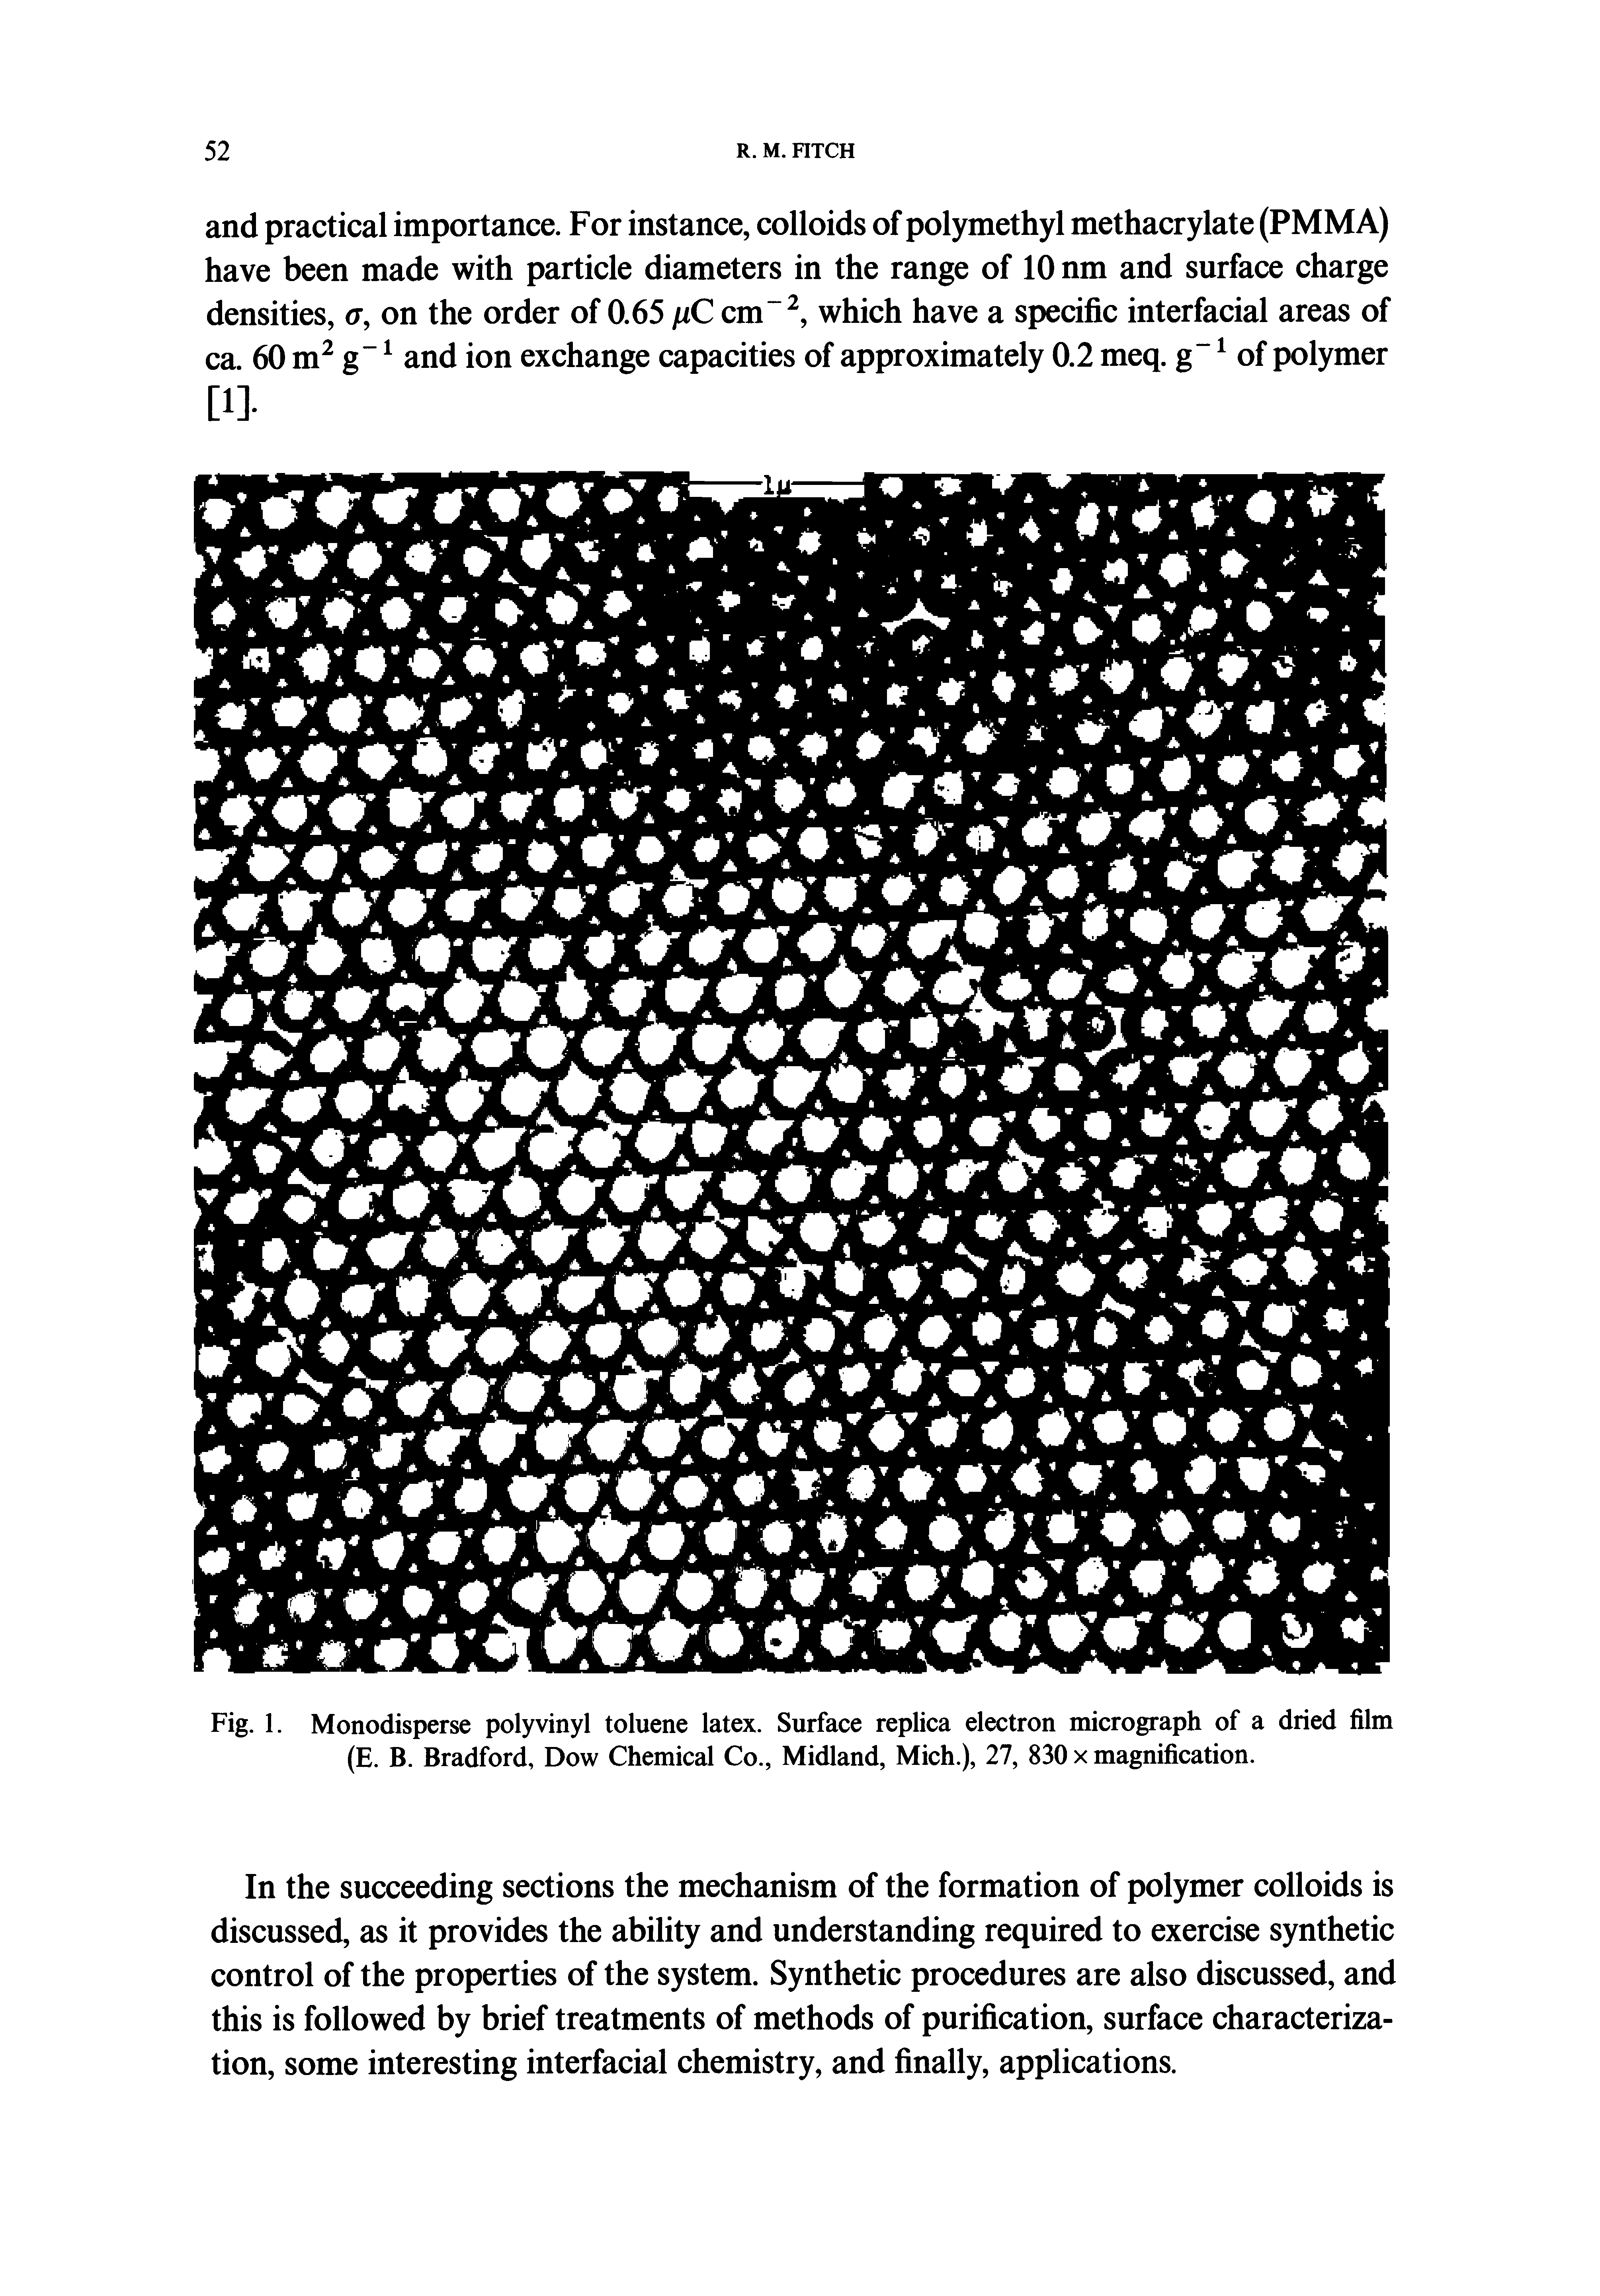 Fig. 1. Monodisperse polyvinyl toluene latex. Surface replica electron micrograph of a dried film (E. B. Bradford, Dow Chemical Co., Midland, Mich.), 27, 830 x magnification.